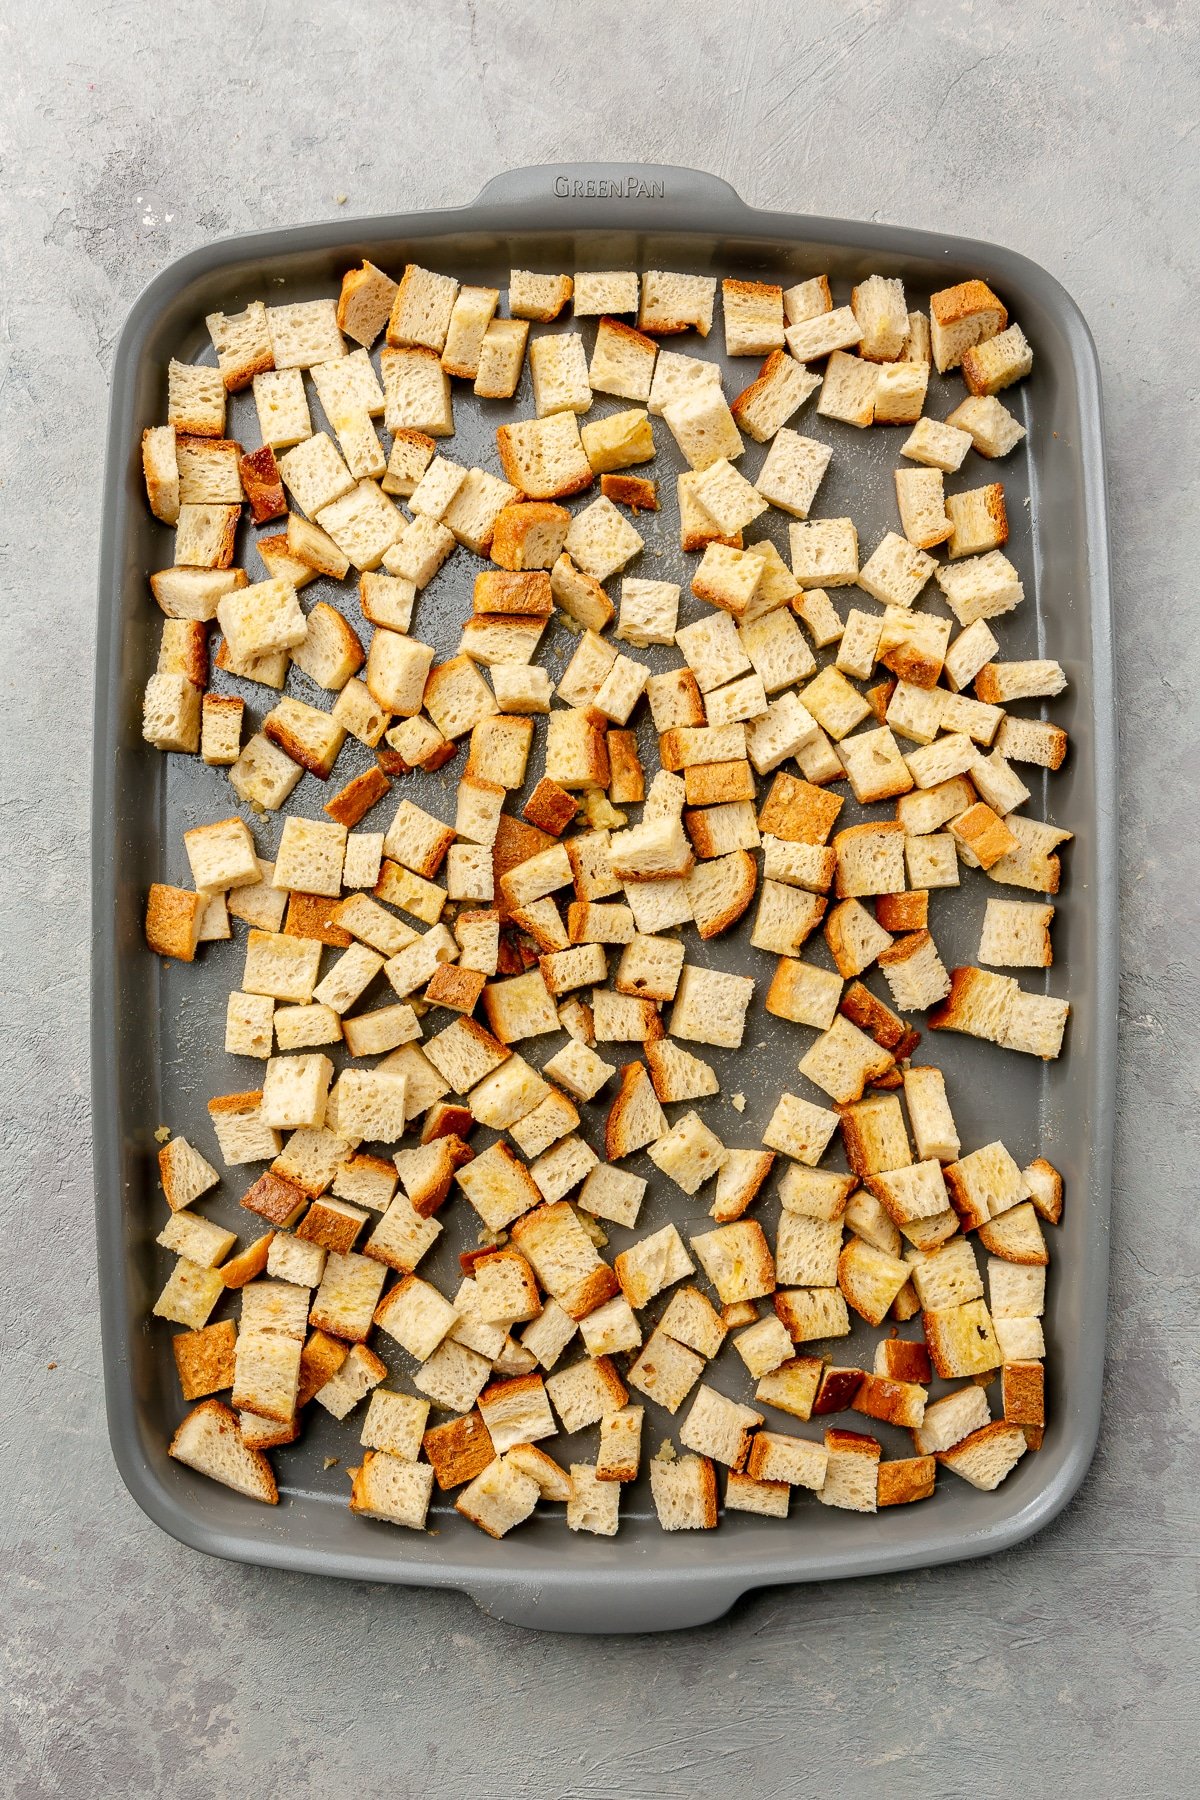 Toasted, lightly golden, pieces of cubed bread sit on a metal baking tray.